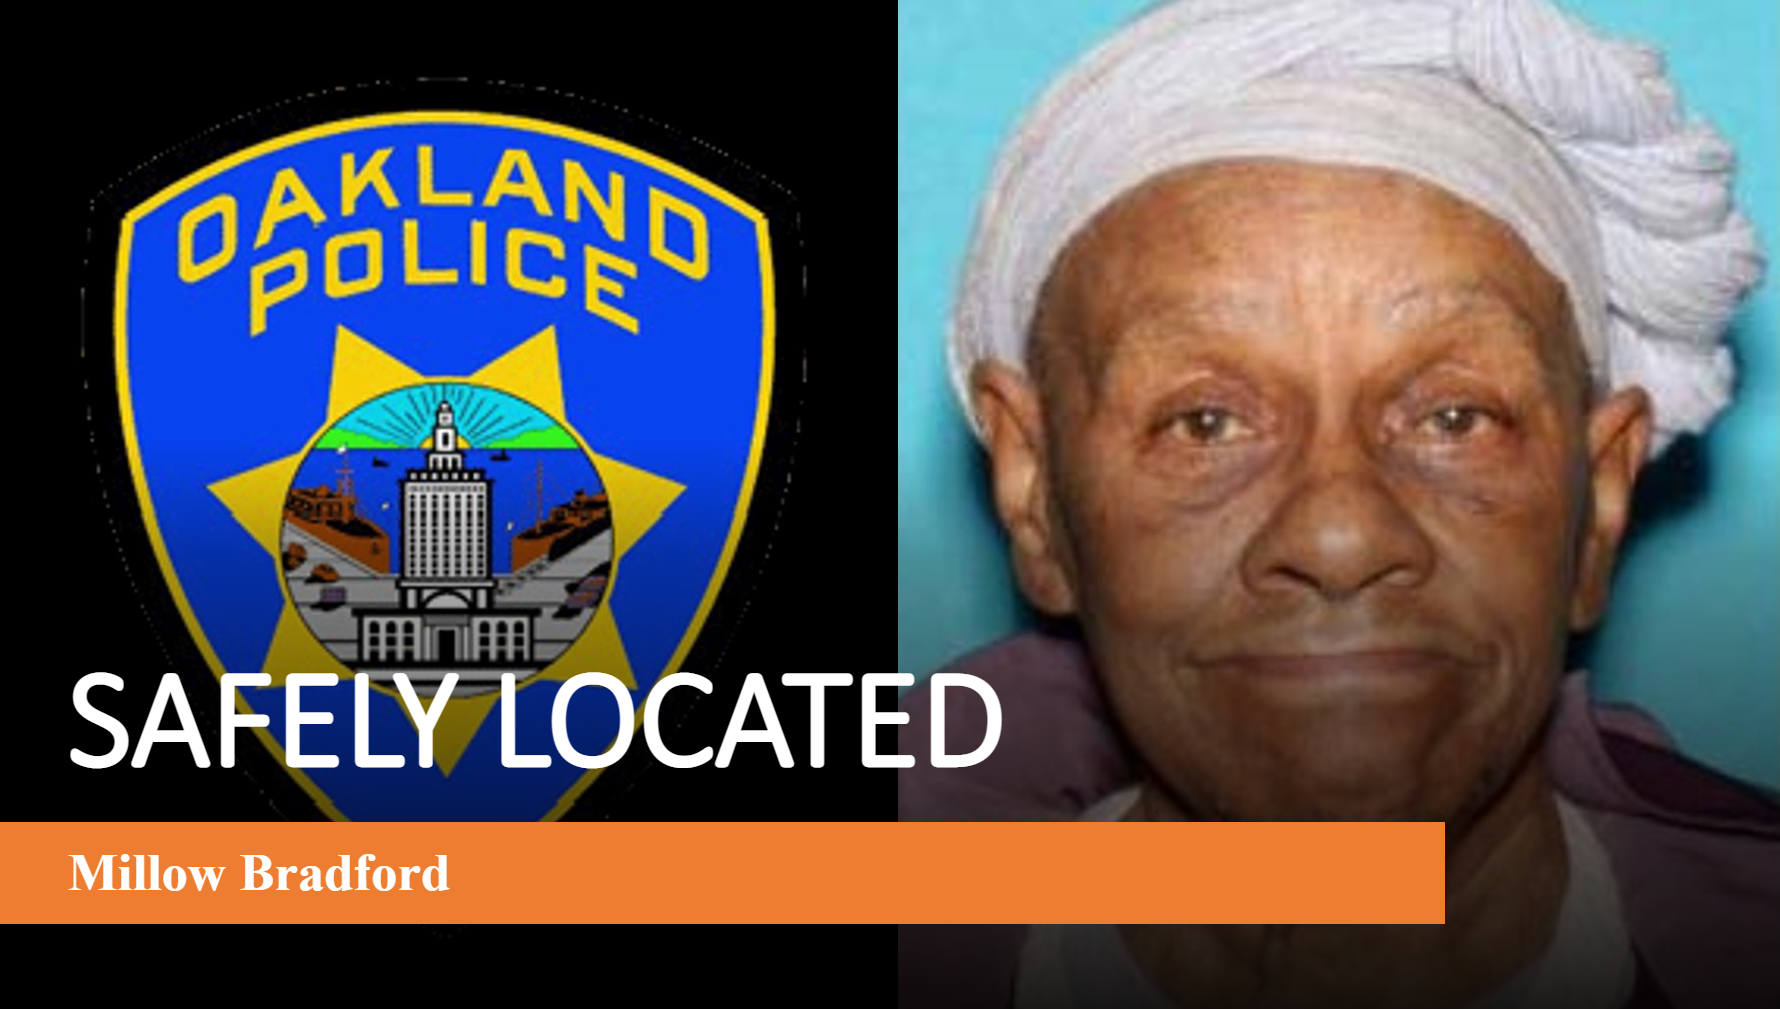 Photo of Millow Bradford who has been safely located.